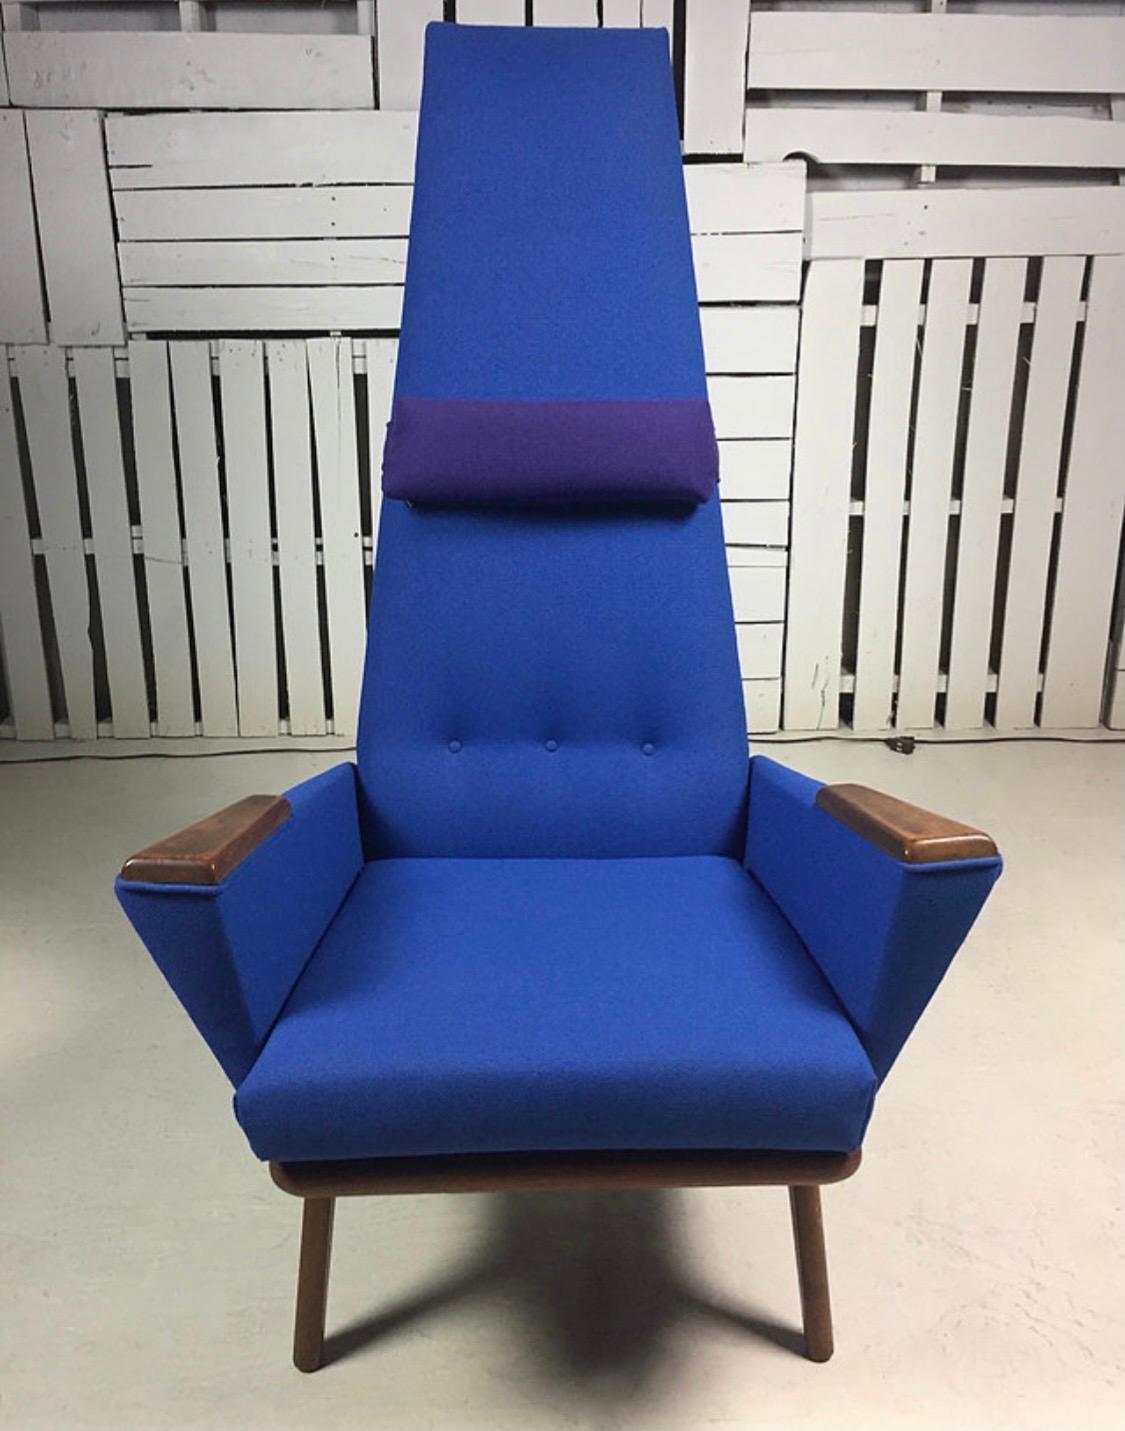 Newly upholstered Pearsall Slim Jim chair, quite magnificent. Set apart by its height, 55